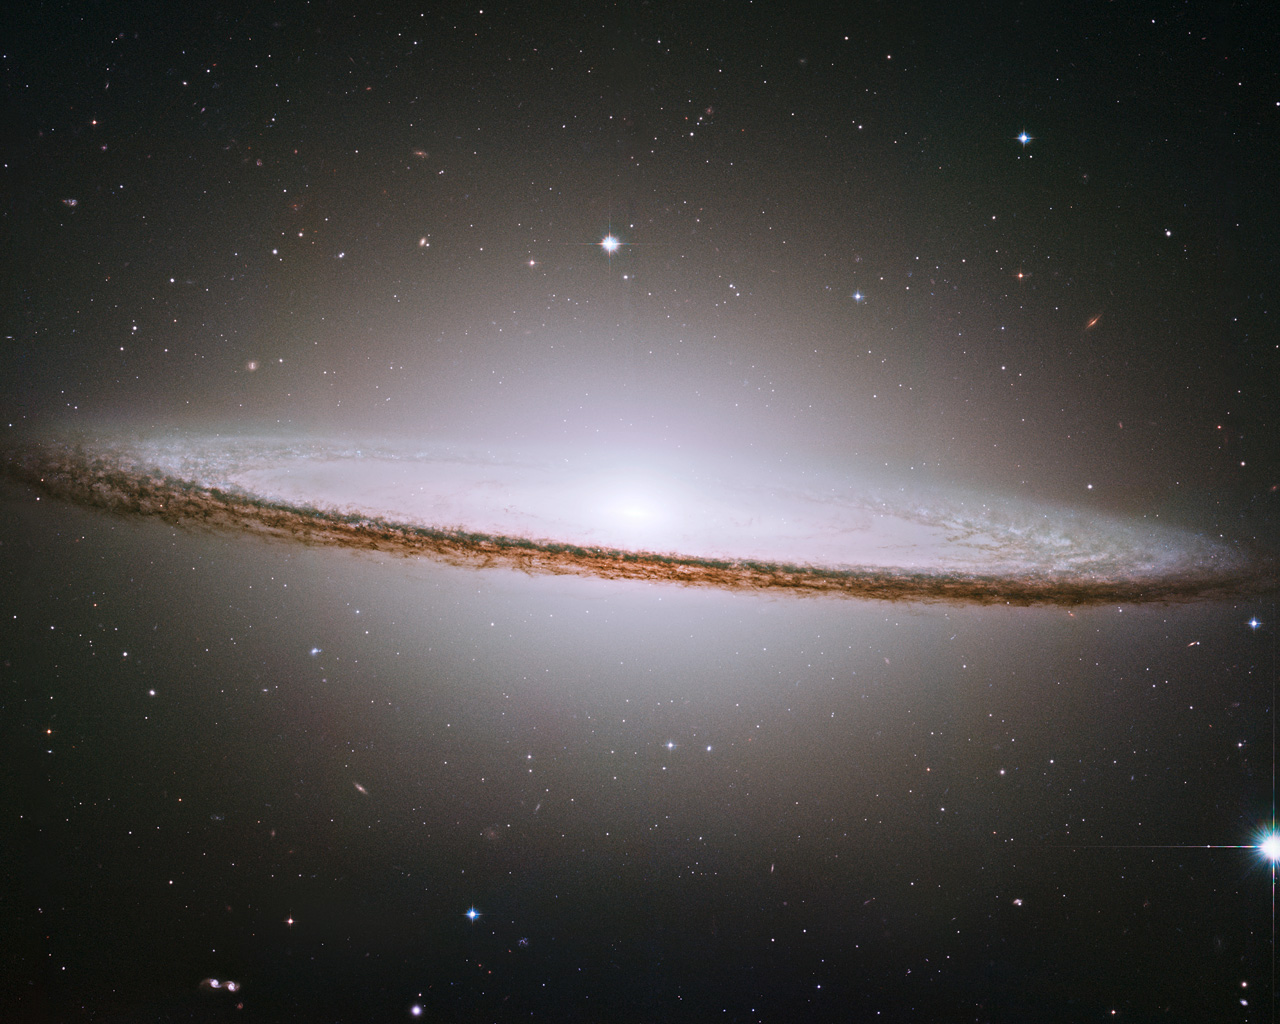 NASA/ESA Hubble Space Telescope has trained its razor-sharp eye on one of the universe's most stately and photogenic galaxies, the Sombrero galaxy, Messier 104 (M104). The galaxy's hallmark is a brilliant white, bulbous core encircled by the thick dust lanes comprising the spiral structure of the galaxy. As seen from Earth, the galaxy is tilted nearly edge-on. We view it from just six degrees north of its equatorial plane. This brilliant galaxy was named the Sombrero because of its resemblance to the broad rim and high-topped Mexican hat. At a relatively bright magnitude of +8, M104 is just beyond the limit of naked-eye visibility and is easily seen through small telescopes. The Sombrero lies at the southern edge of the rich Virgo cluster of galaxies and is one of the most massive objects in that group, equivalent to 800 billion suns. The galaxy is 50,000 light-years across and is located 28 million light-years from Earth.